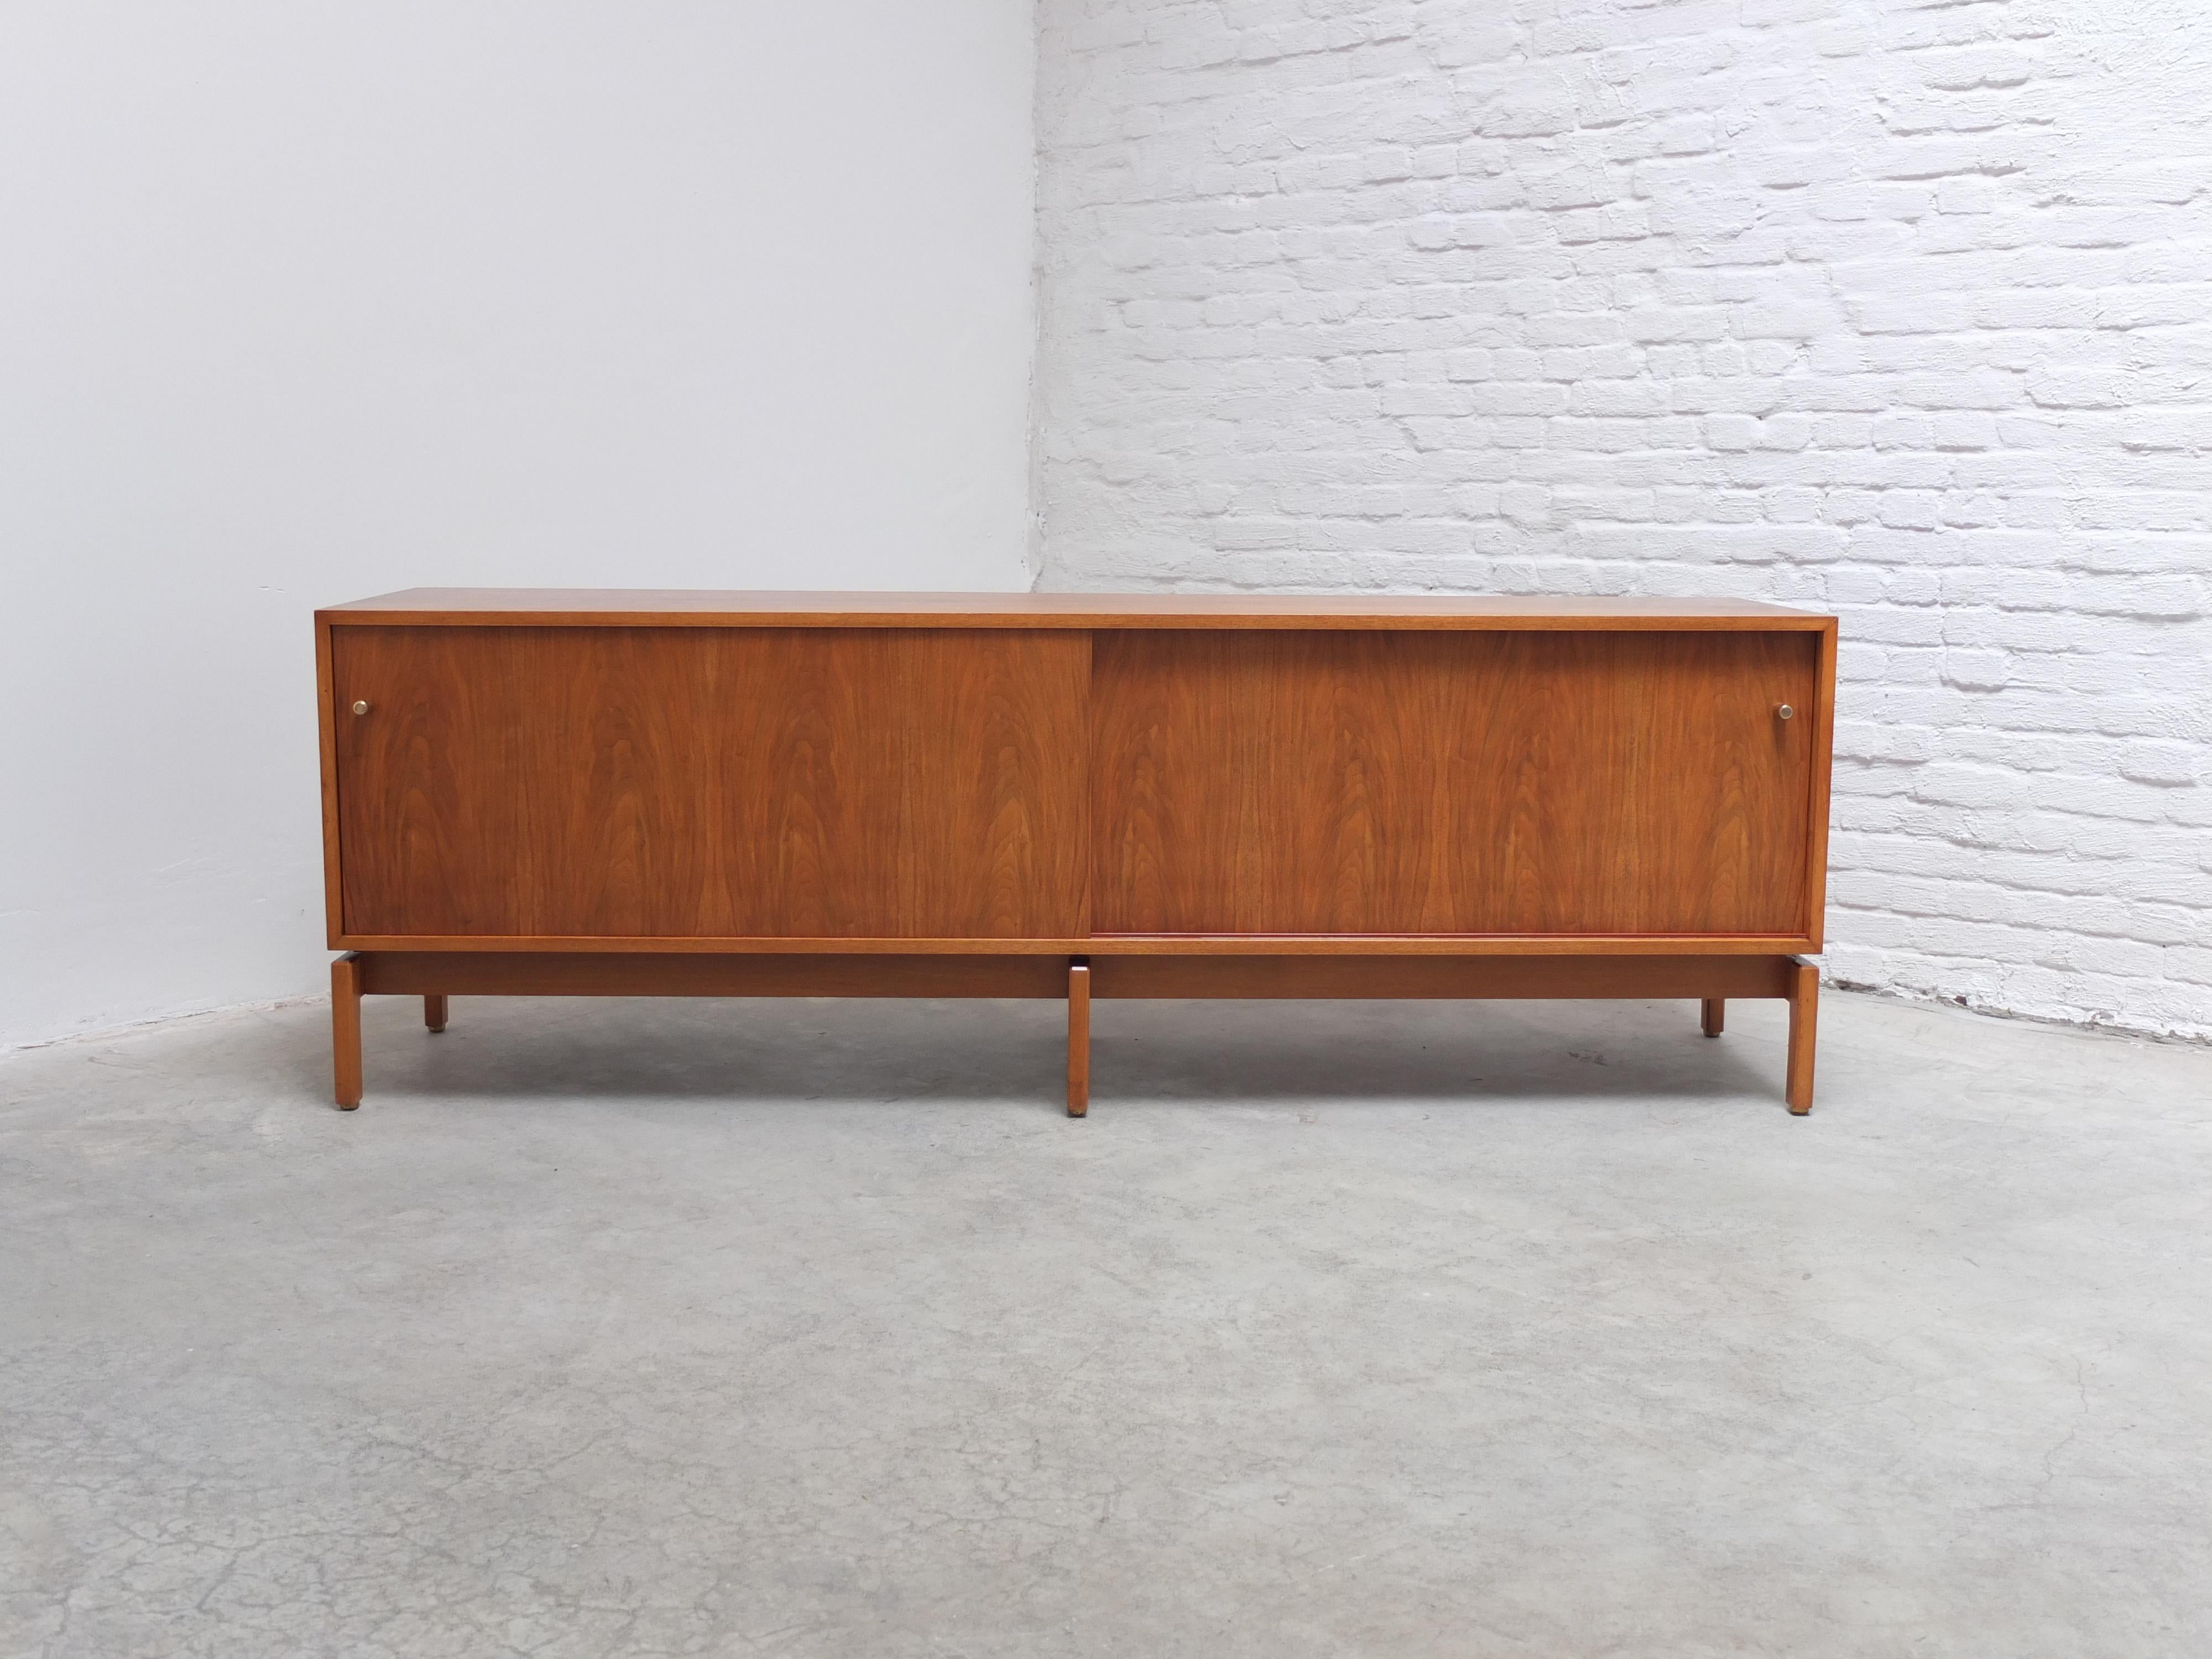 Unique sideboard with sliding doors from the ‘Abstracta’ series designed by Jos De Mey for Van Den Berghe-Pauvers during the 1960s. Remarkable is the low height of this model which is uncommon and makes it perfect as a tv stand for example. The